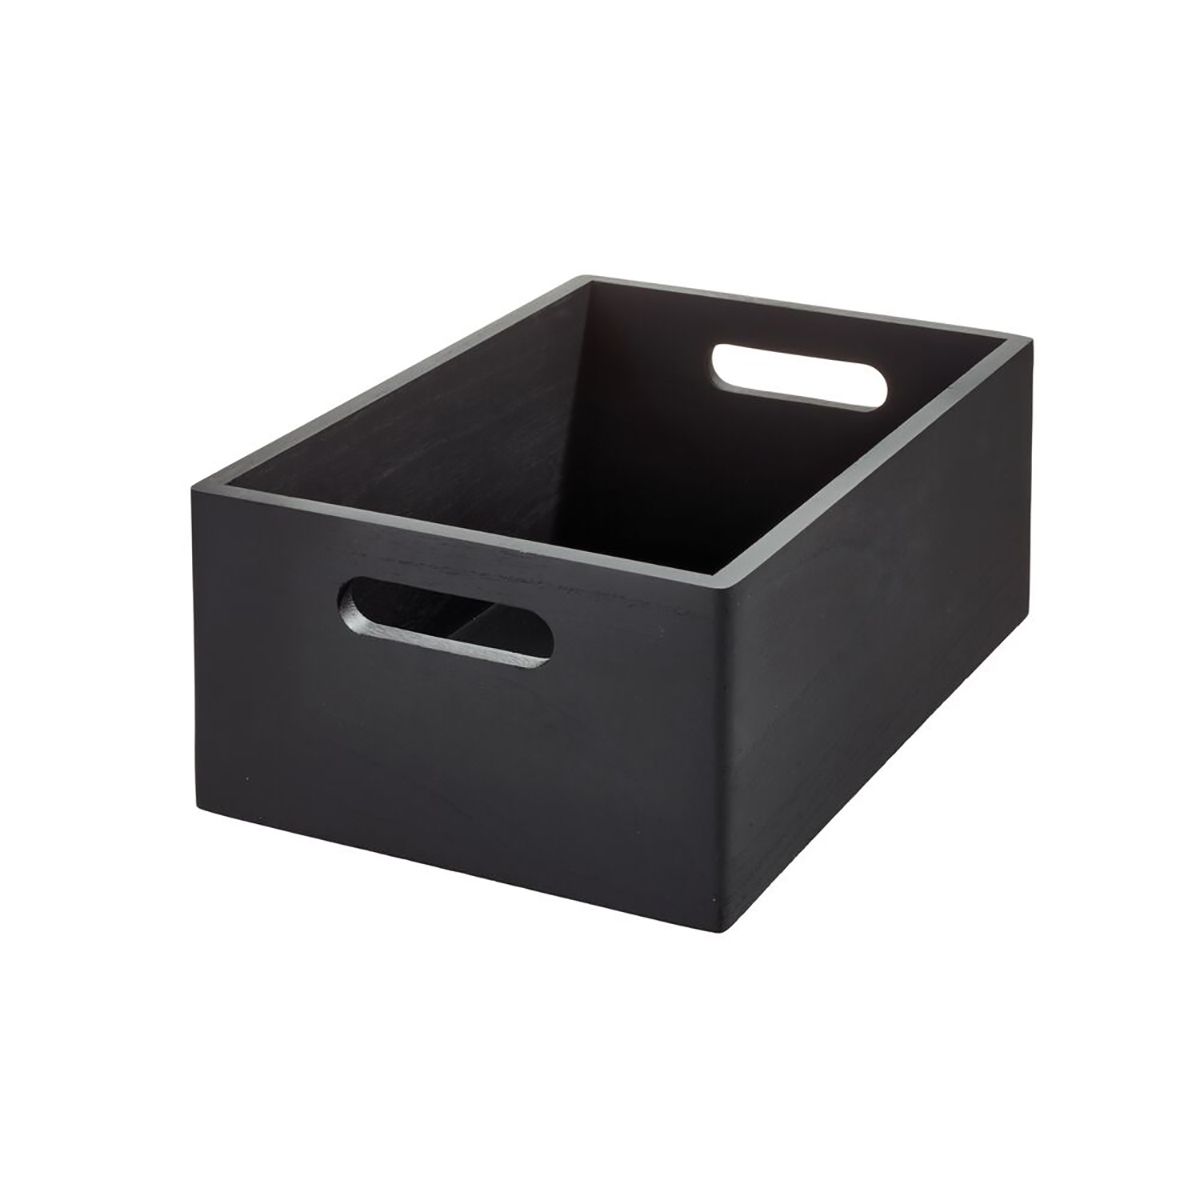 THE HOME EDIT Large Wooden All-Purpose Onyx | The Container Store